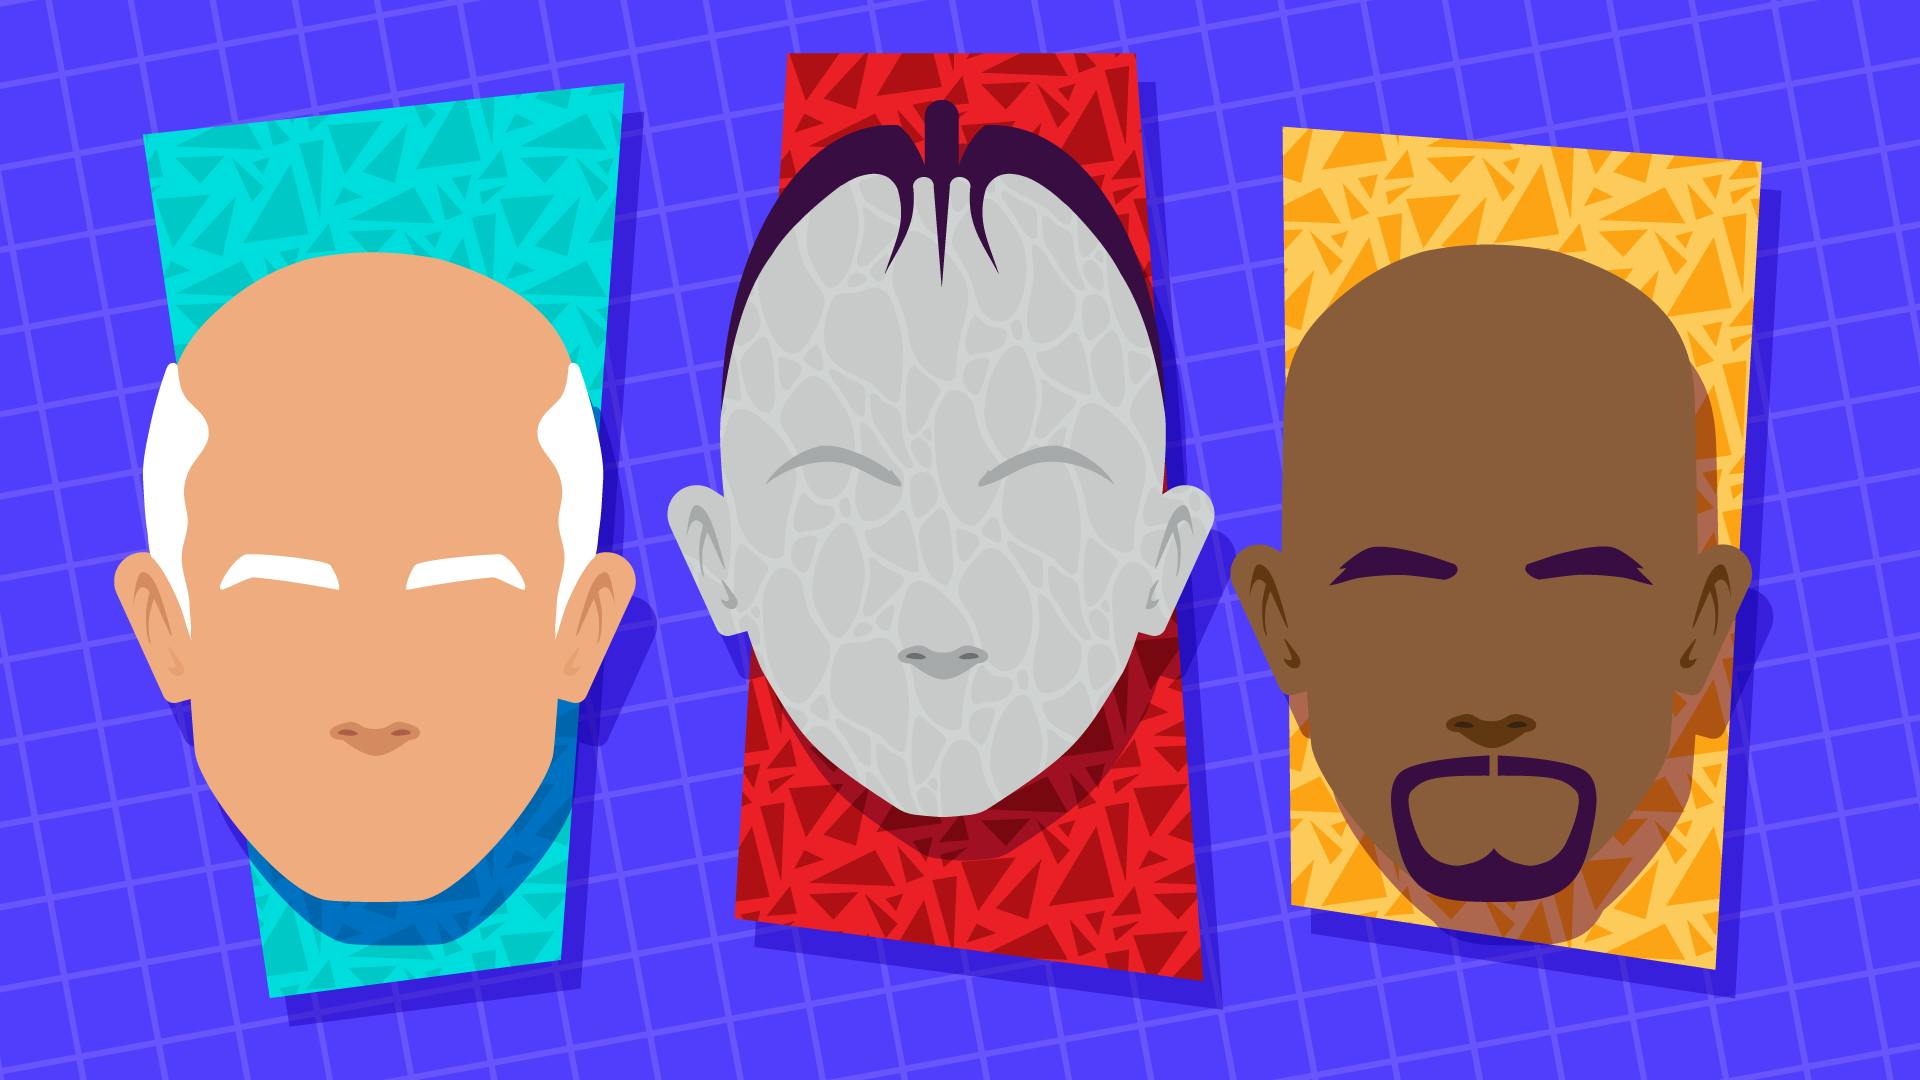 Illustration of Jean-Luc Picard, the Borg Queen, and Benjamin Sisko and their bald heads